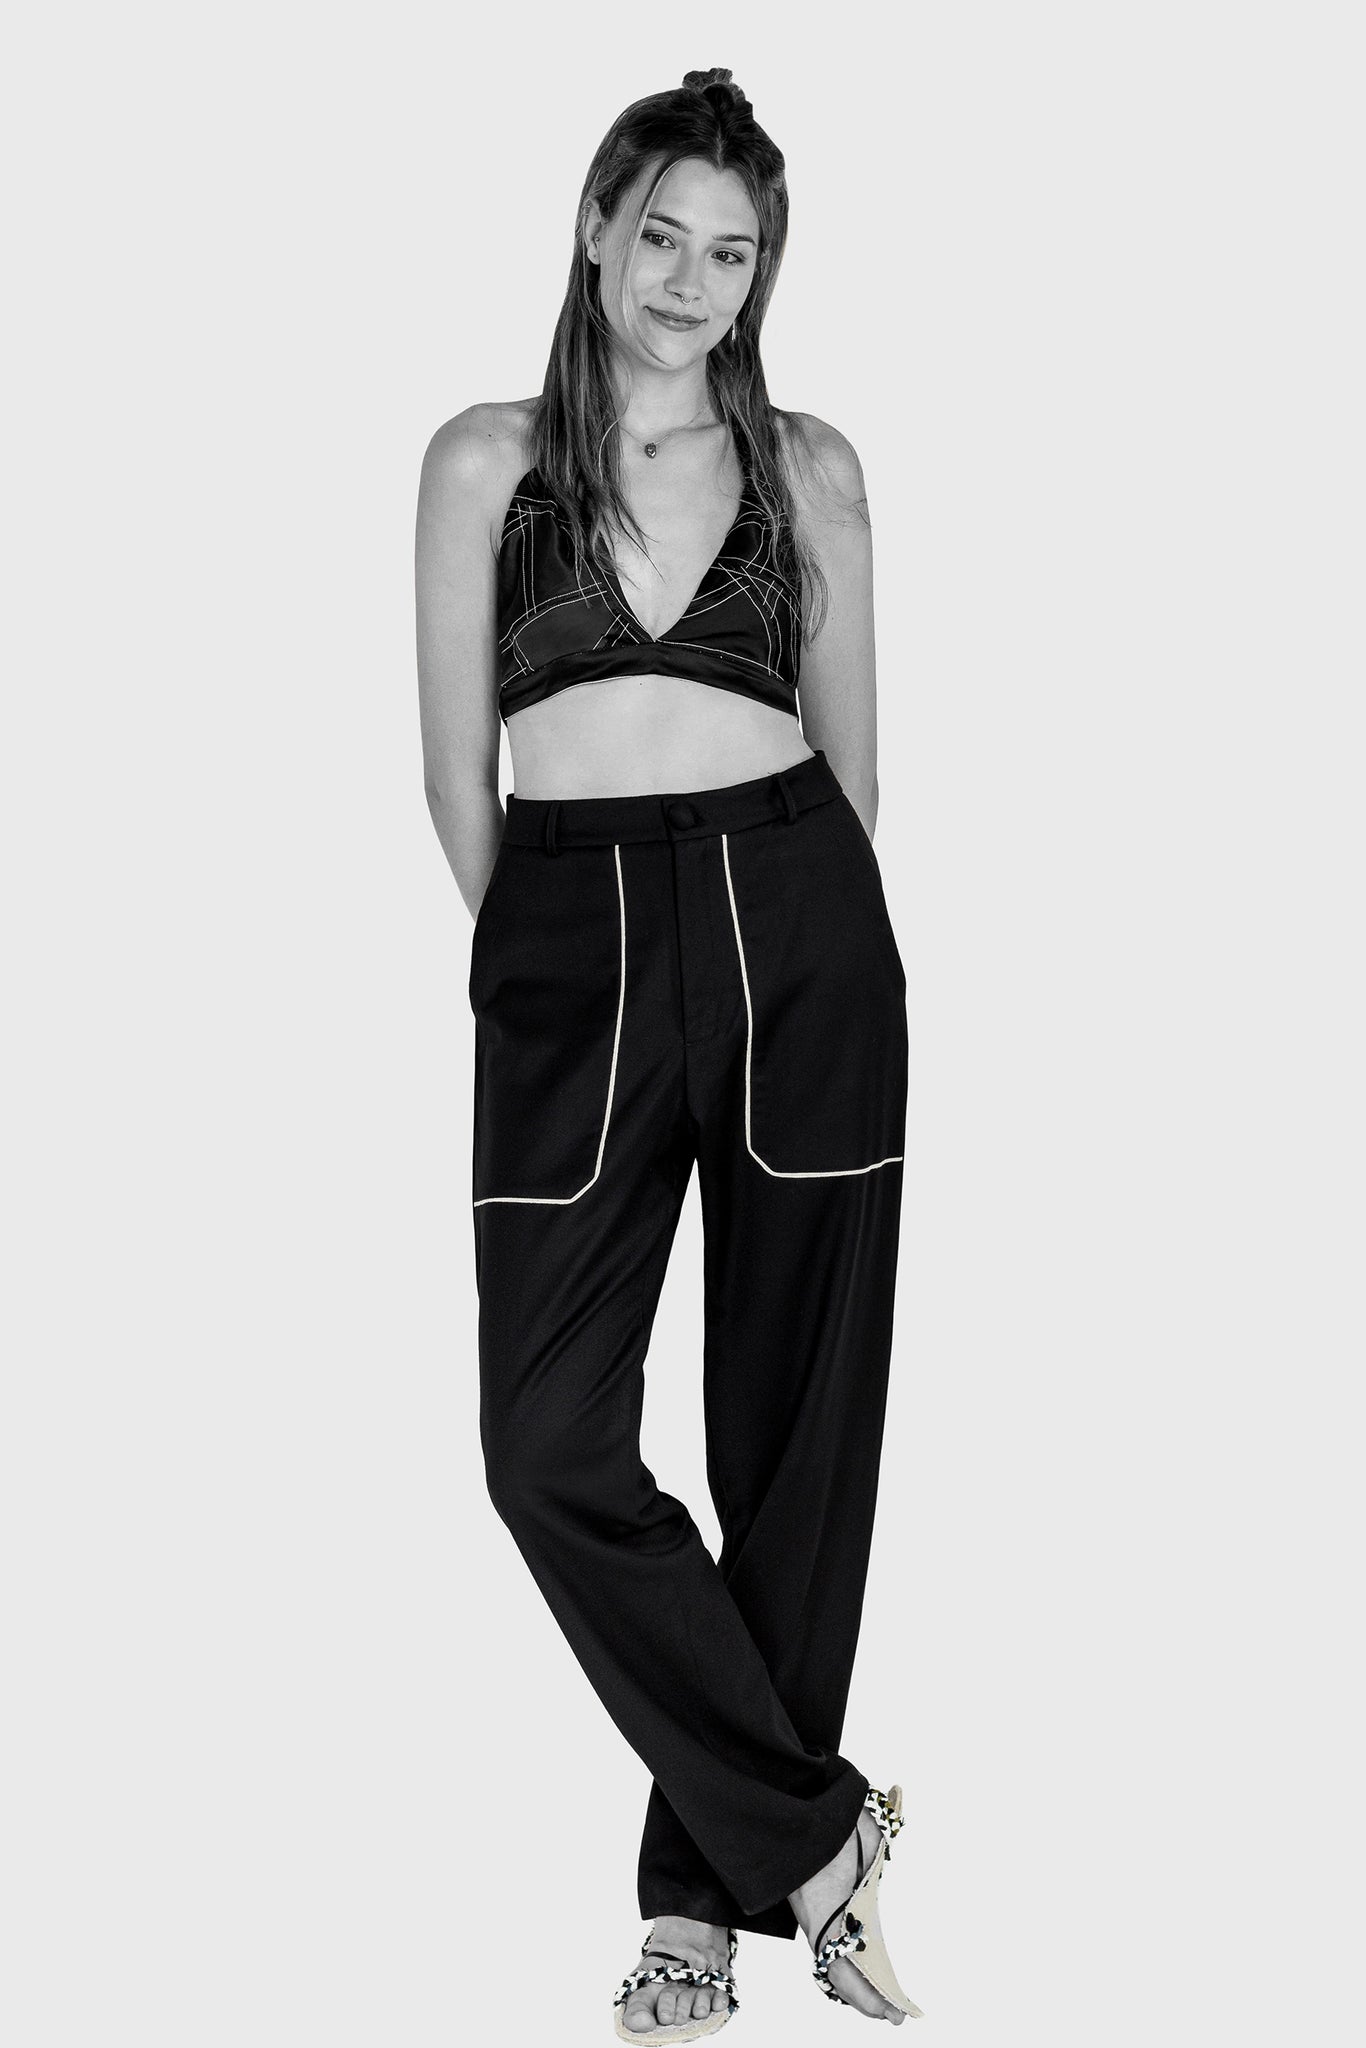 Ruxandra fashion, all black look, spring summer, upcycled silk bra with white thread over, black wool long trousers, super casual fun look.